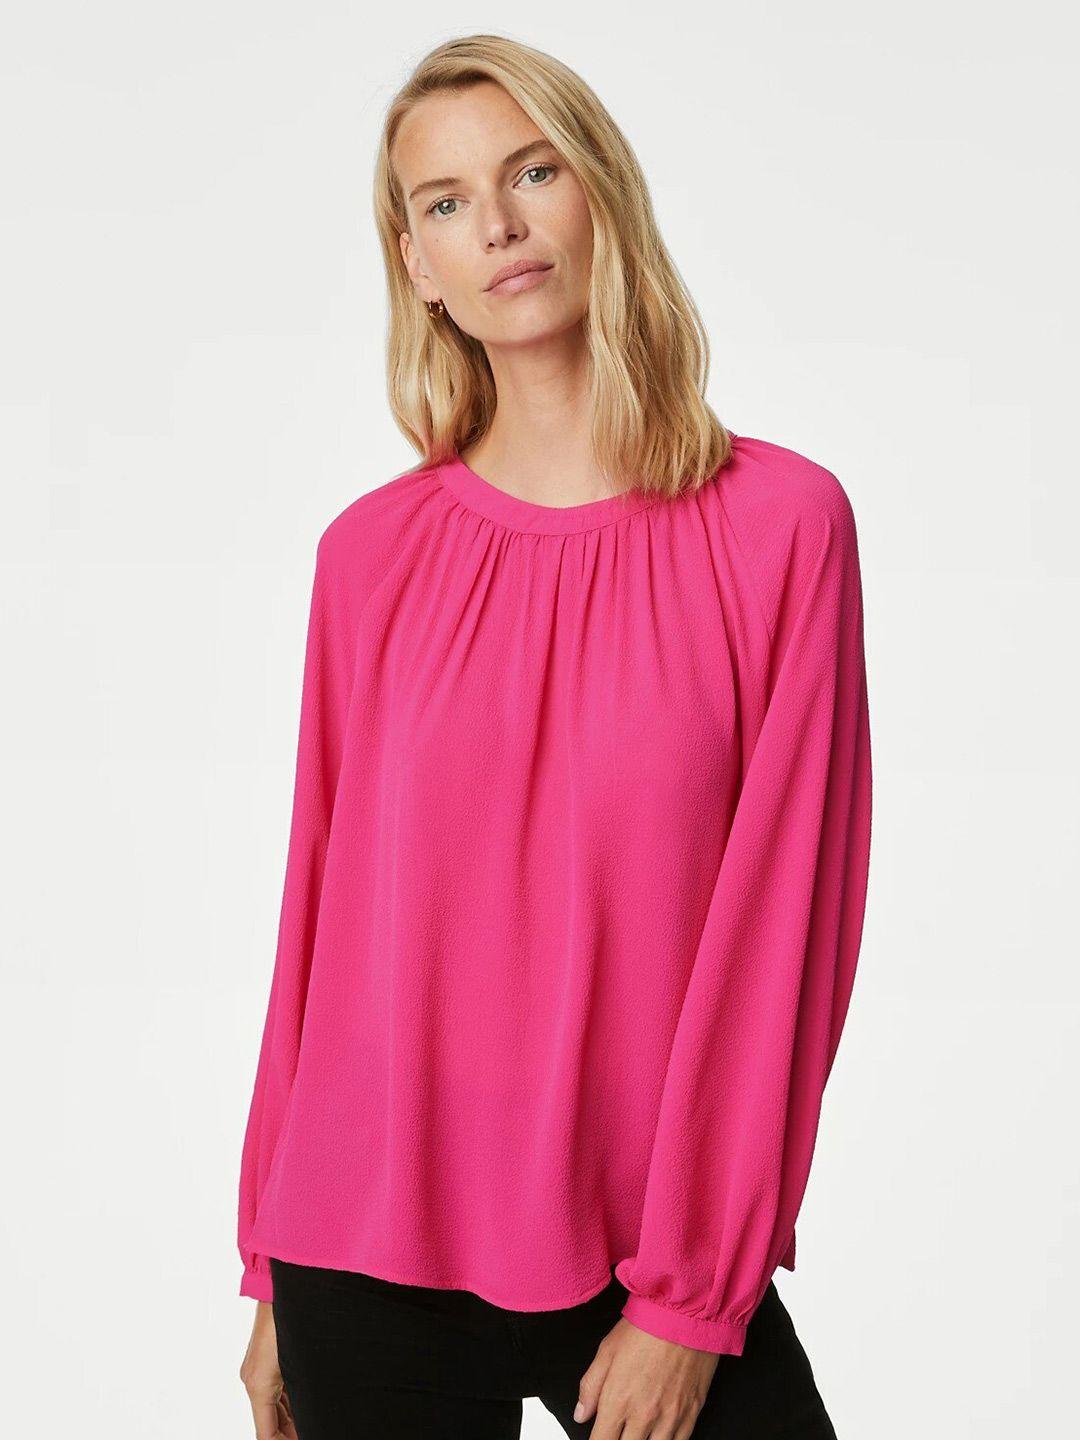 marks & spencer cuffed sleeves gathered detail top